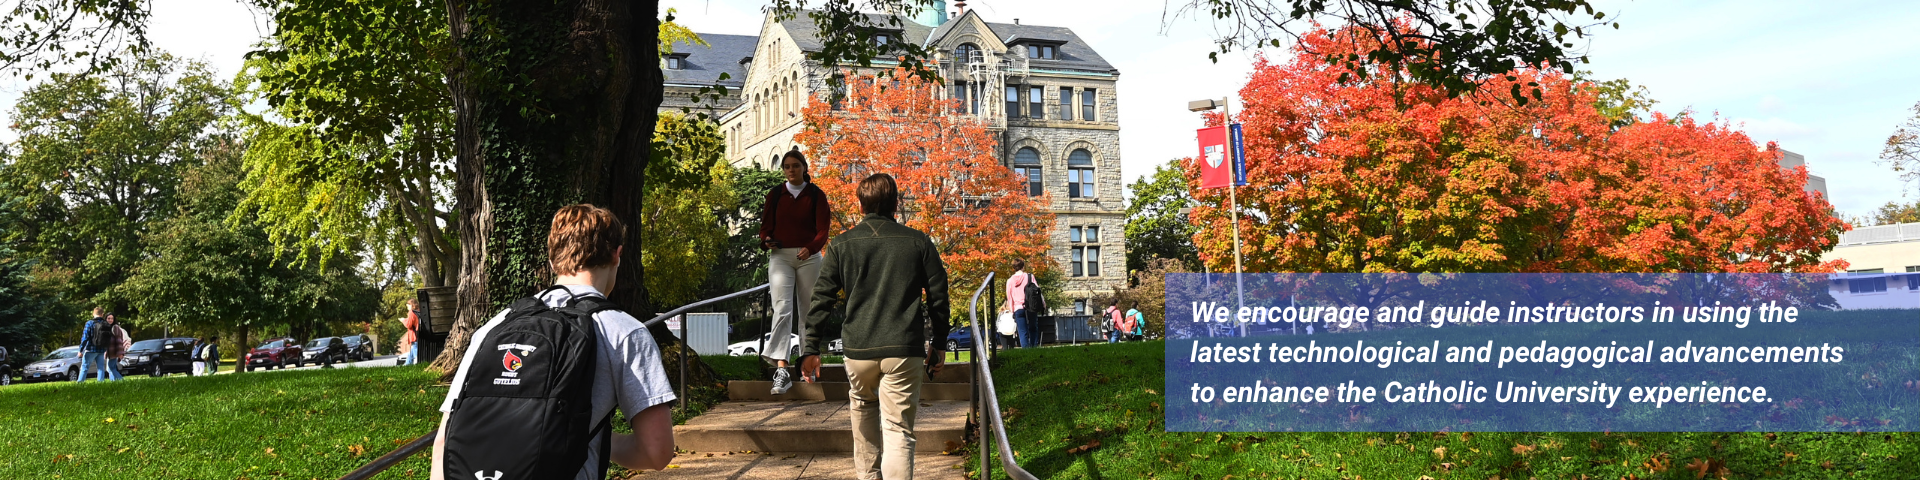 Students walking up the hill towards McMahon on a sunny day. A text box says We encourage and guide instructors in using the latest technological and pedagogical advancements to enhance the Catholic University experience.